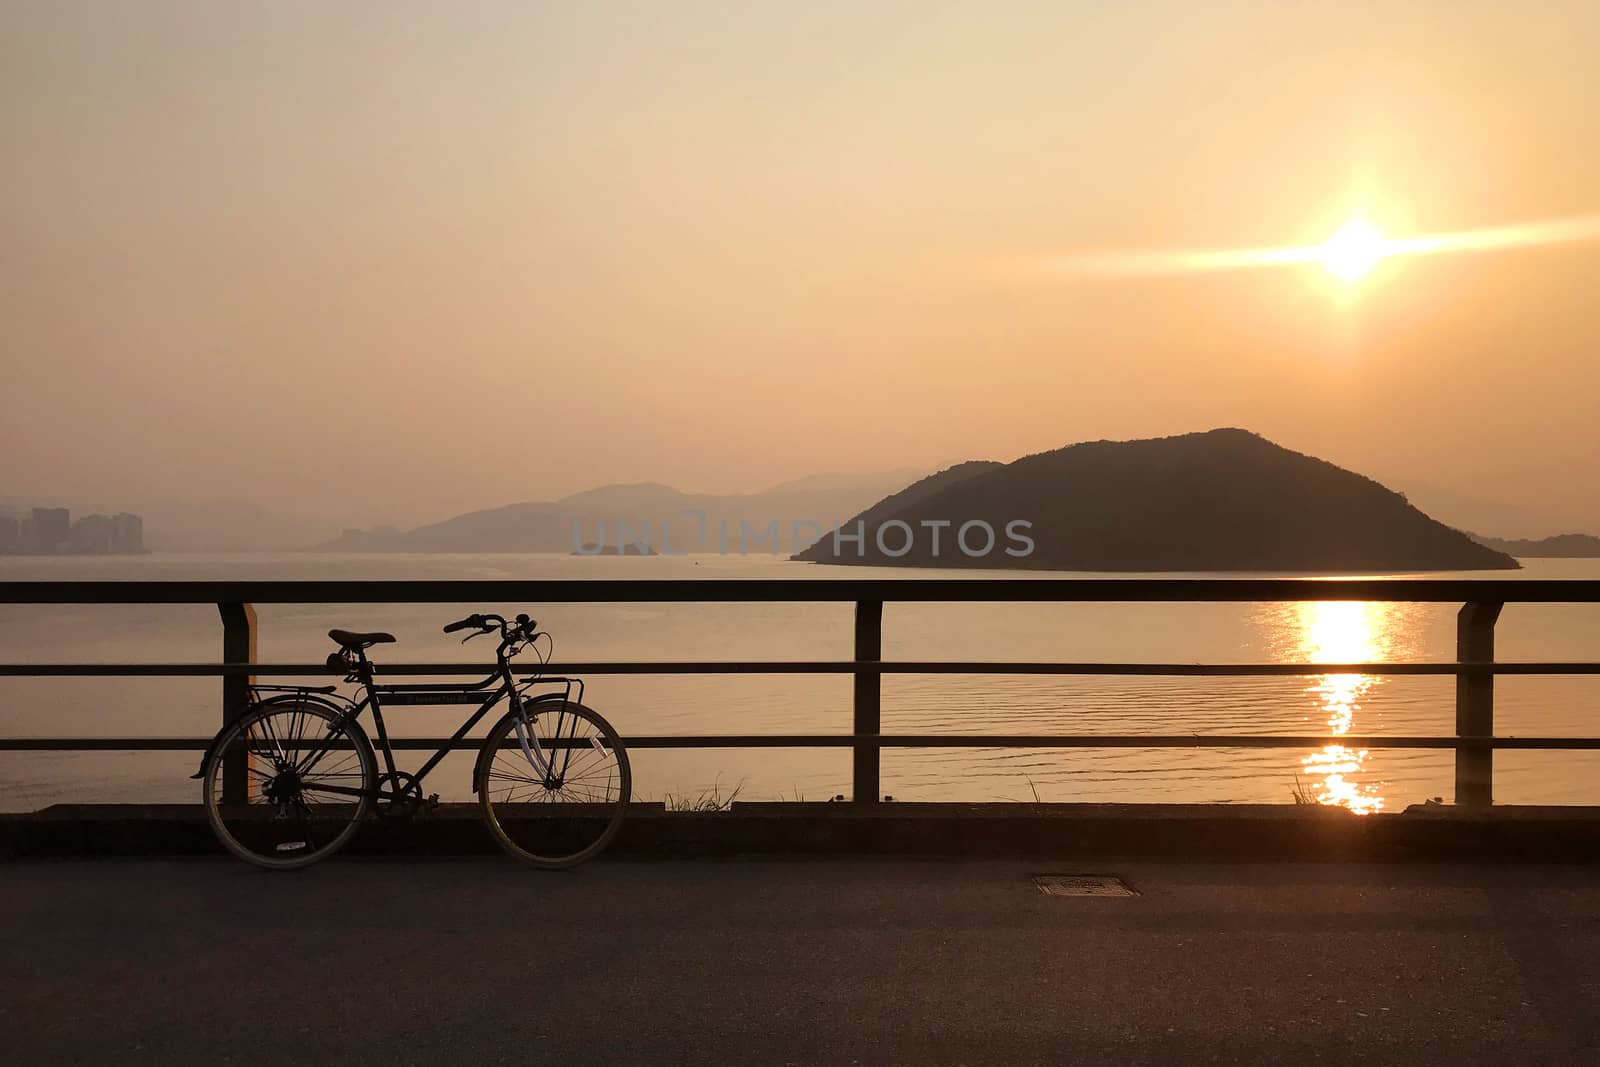 Silhouette of retro bicycle, fence, ocean, mountain at sunset by cougarsan